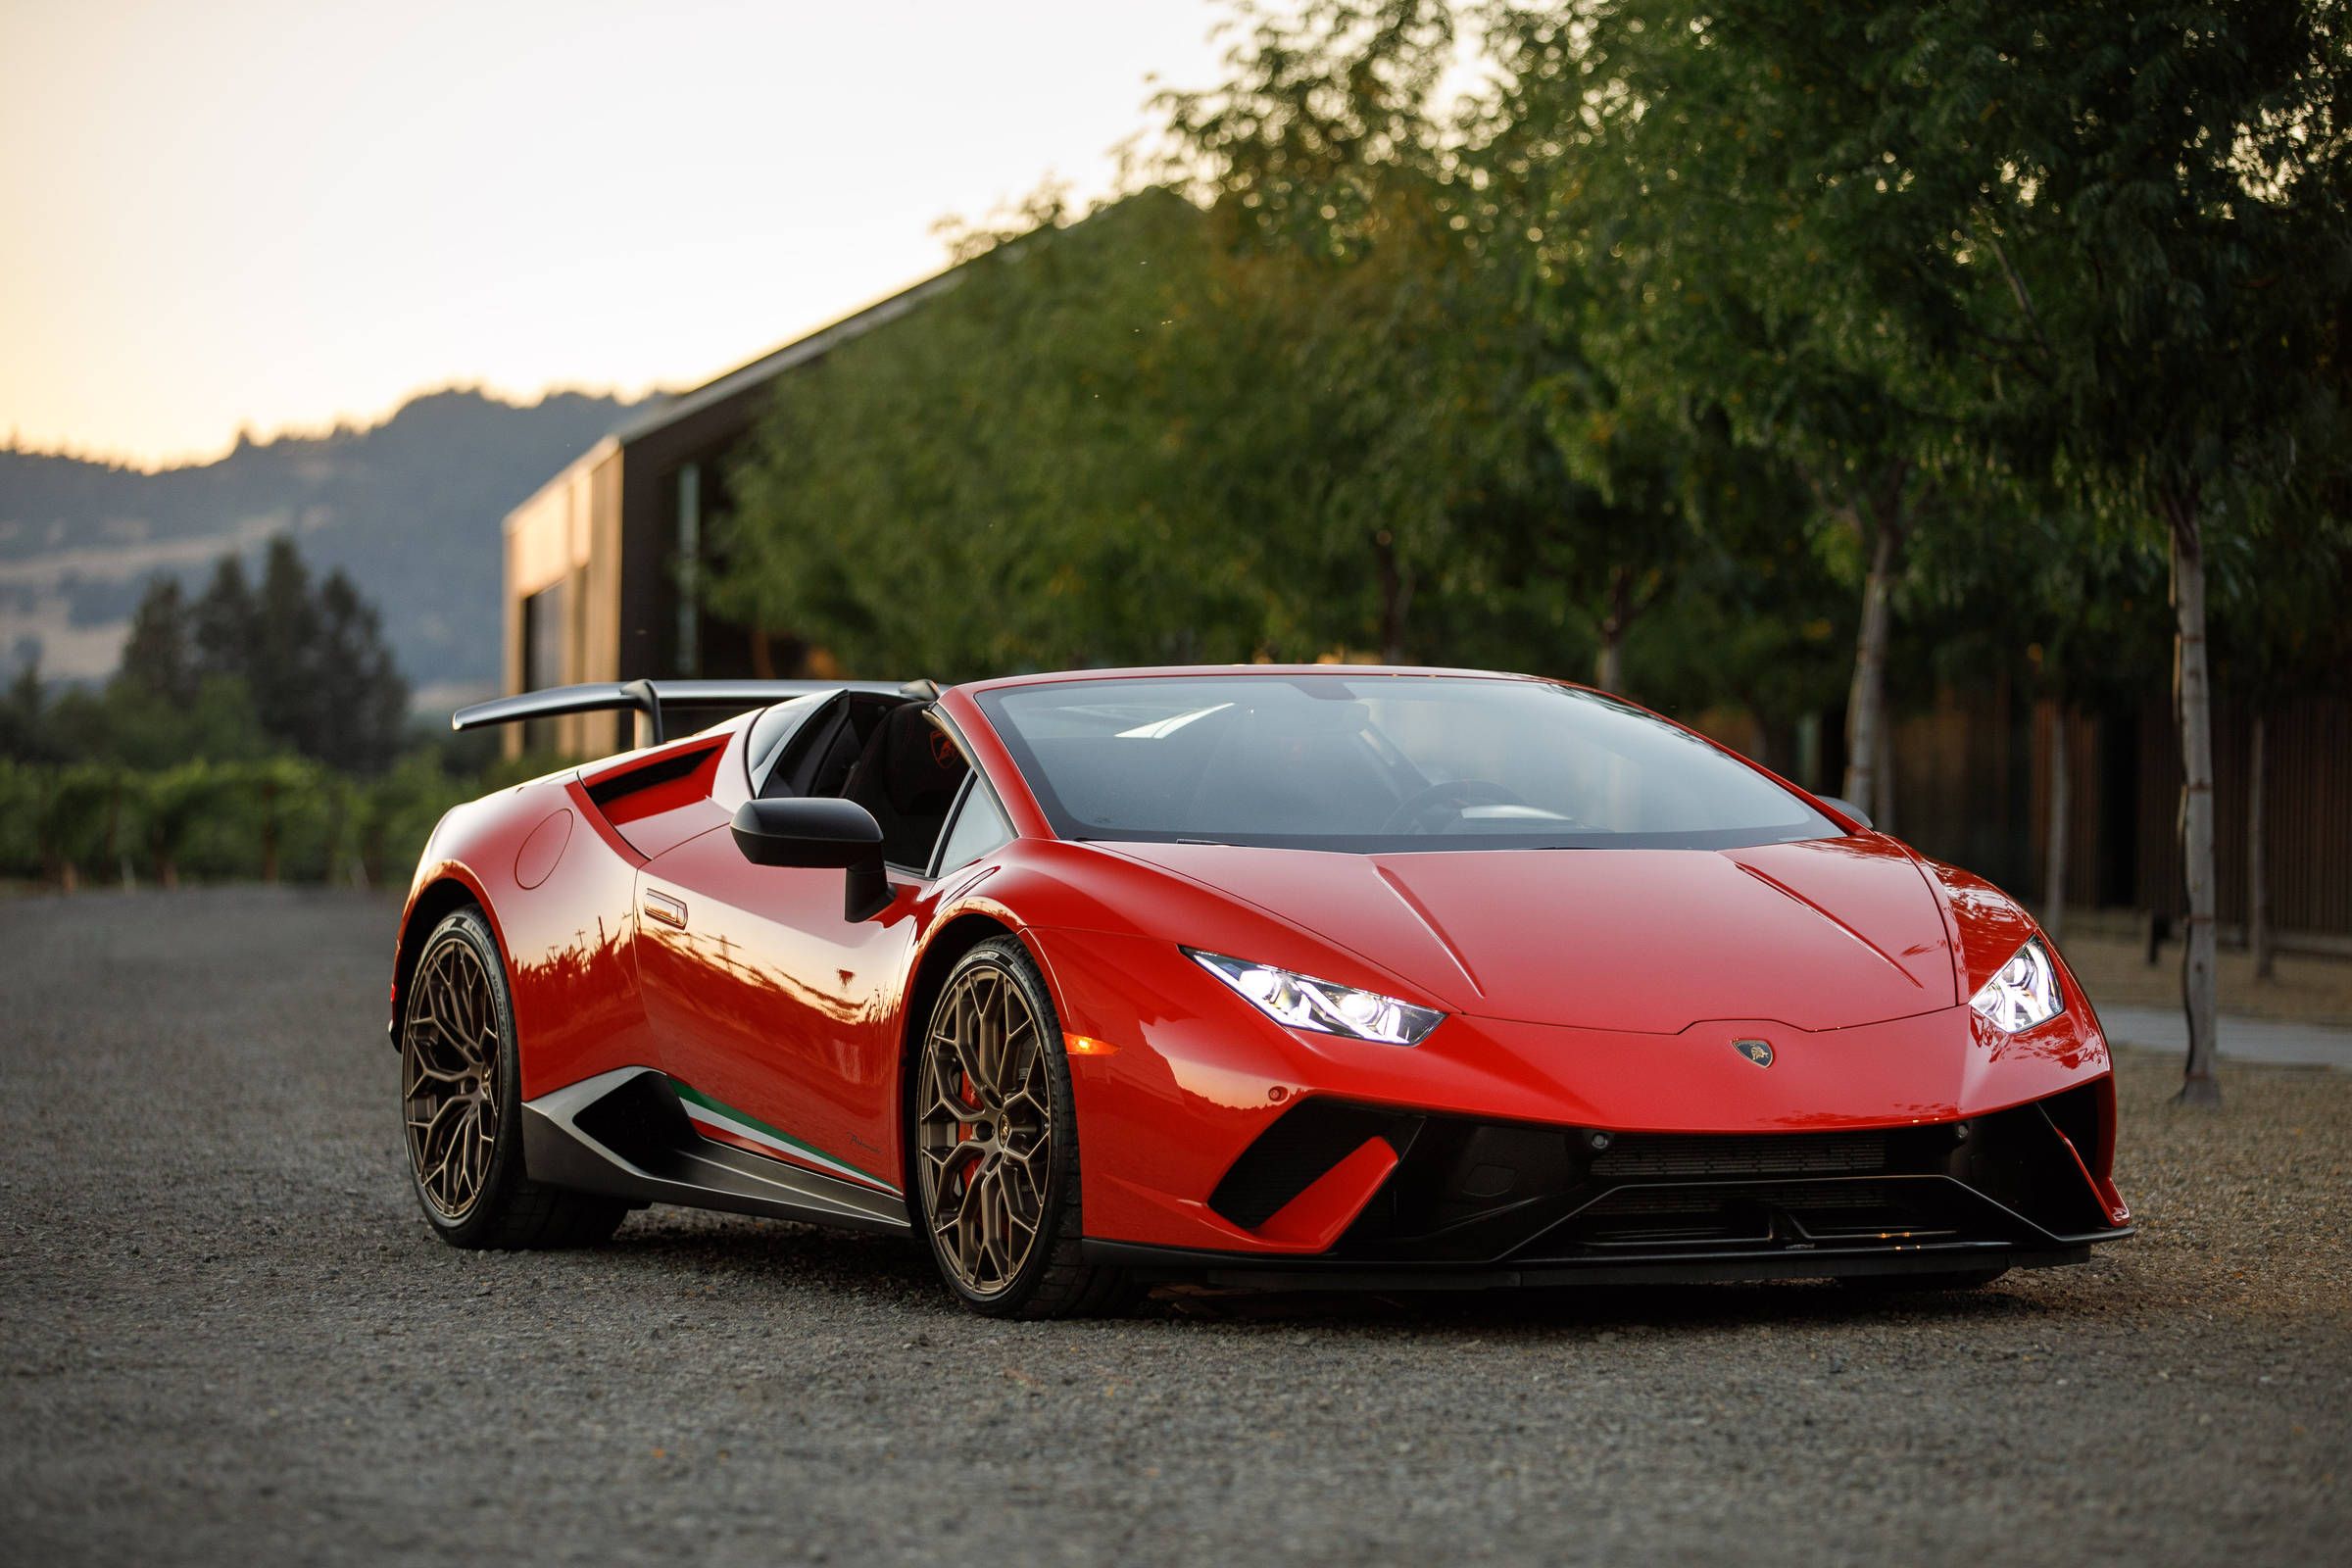 2018 Lamborghini Huracan Performante Spyder first drive: King of curves